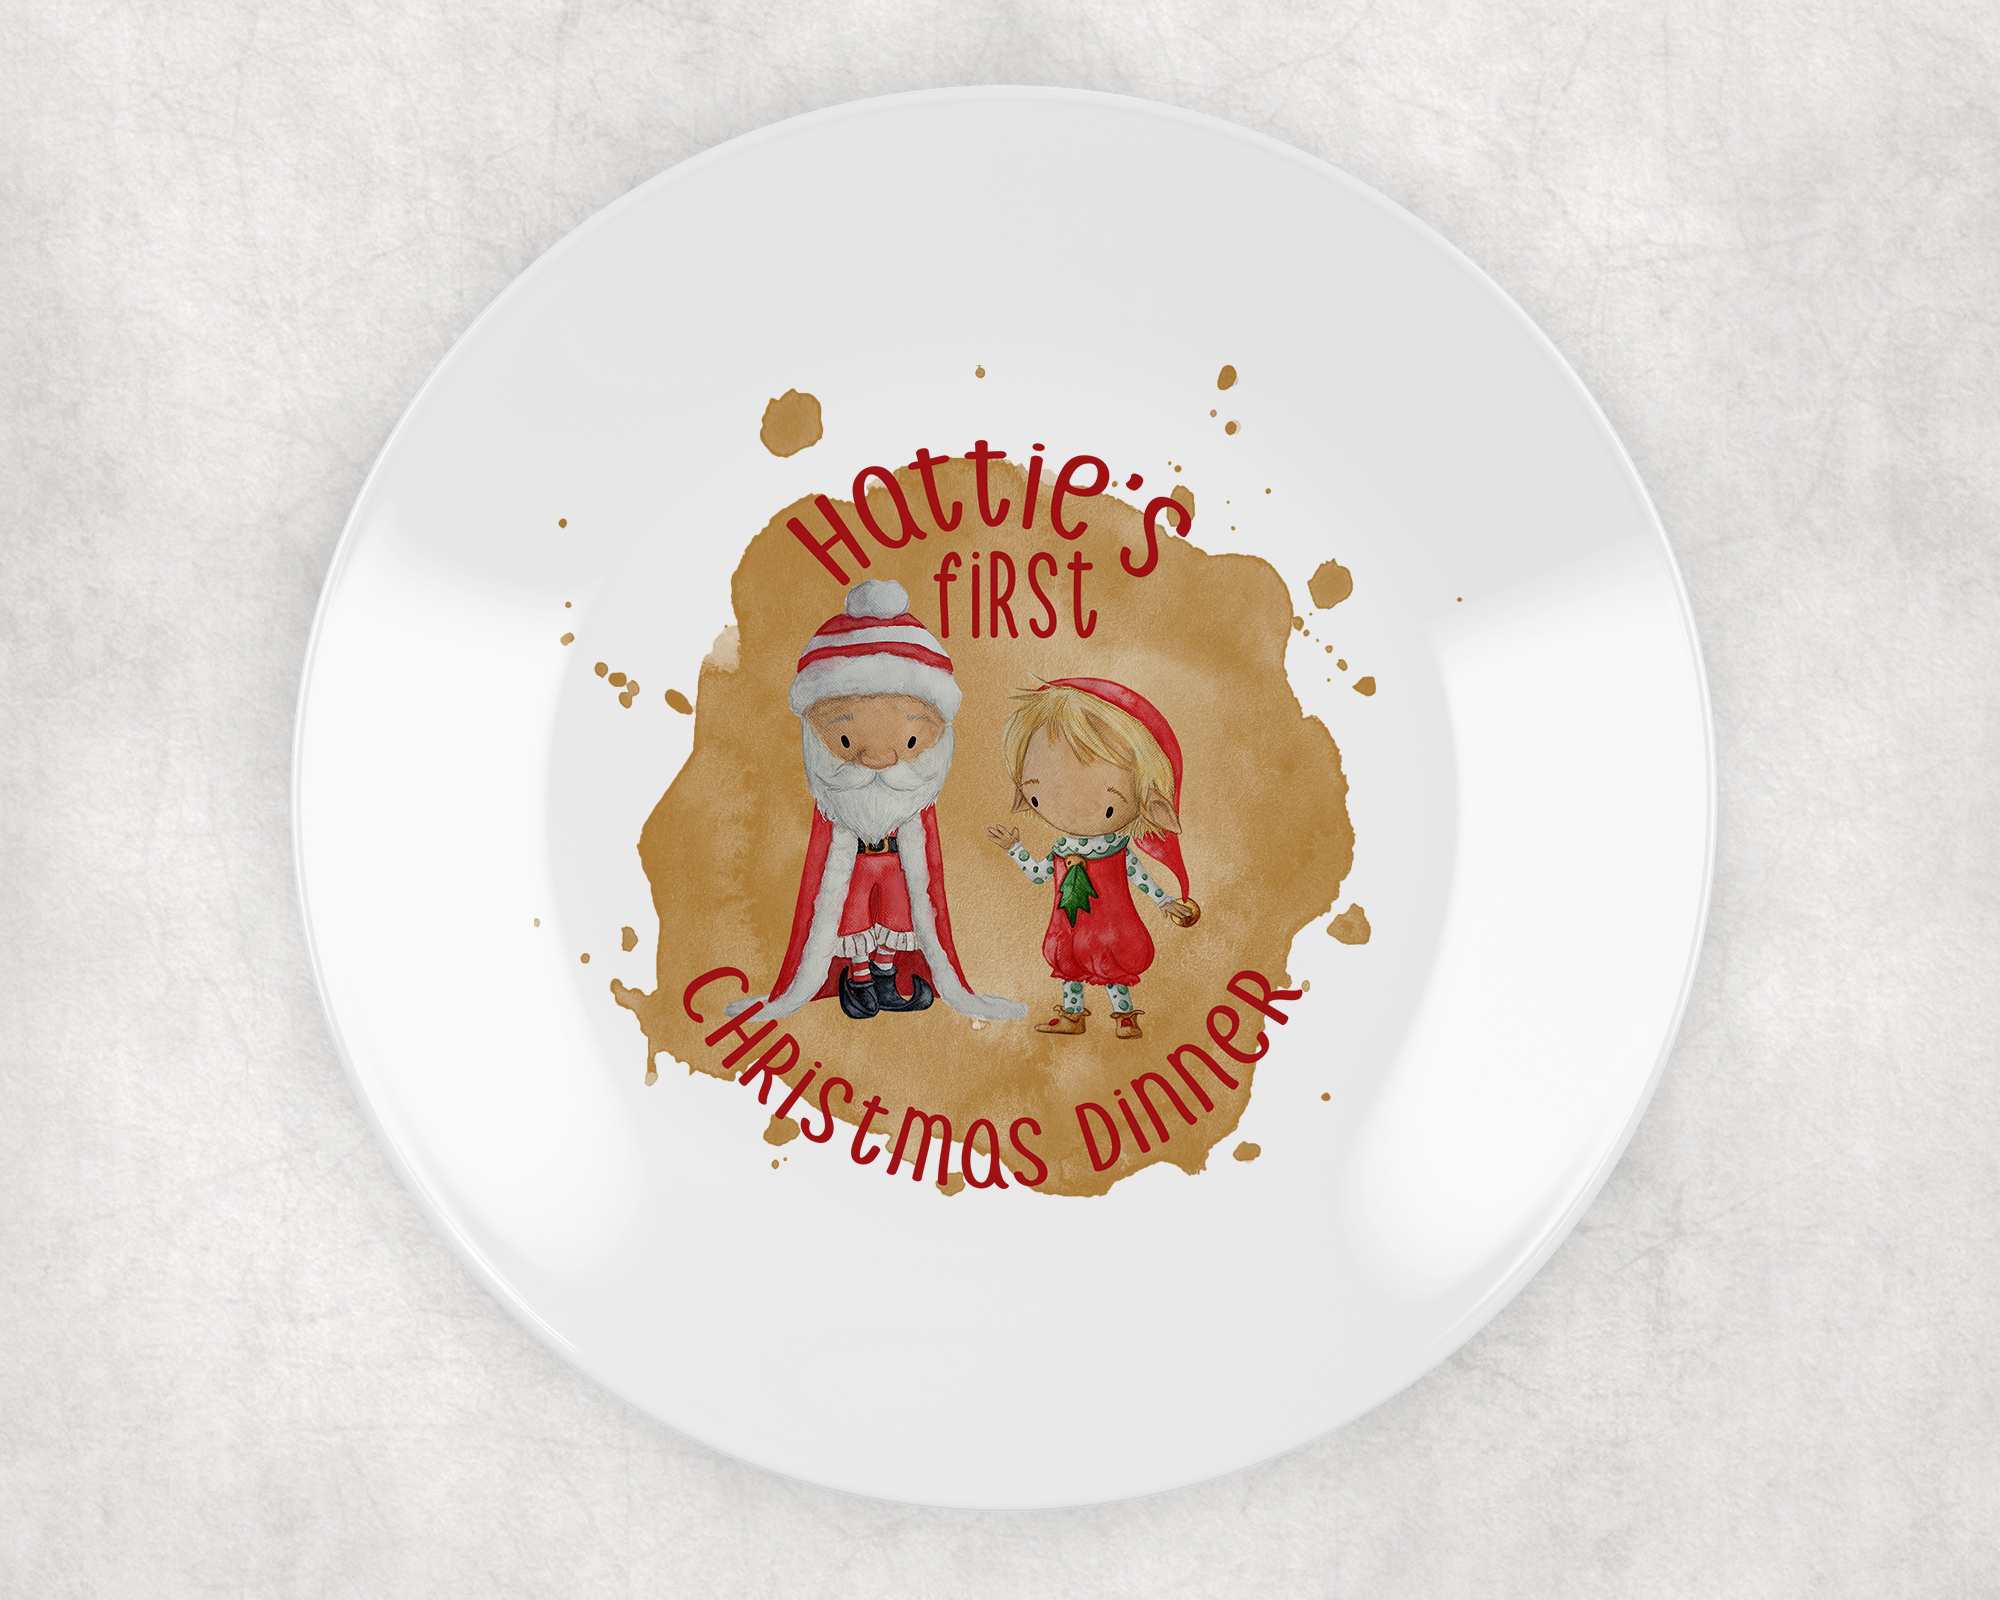 my first christmas plate personalised with santa and elf. ideal plastic non breakable plate. santa boy elf blond hair gold background